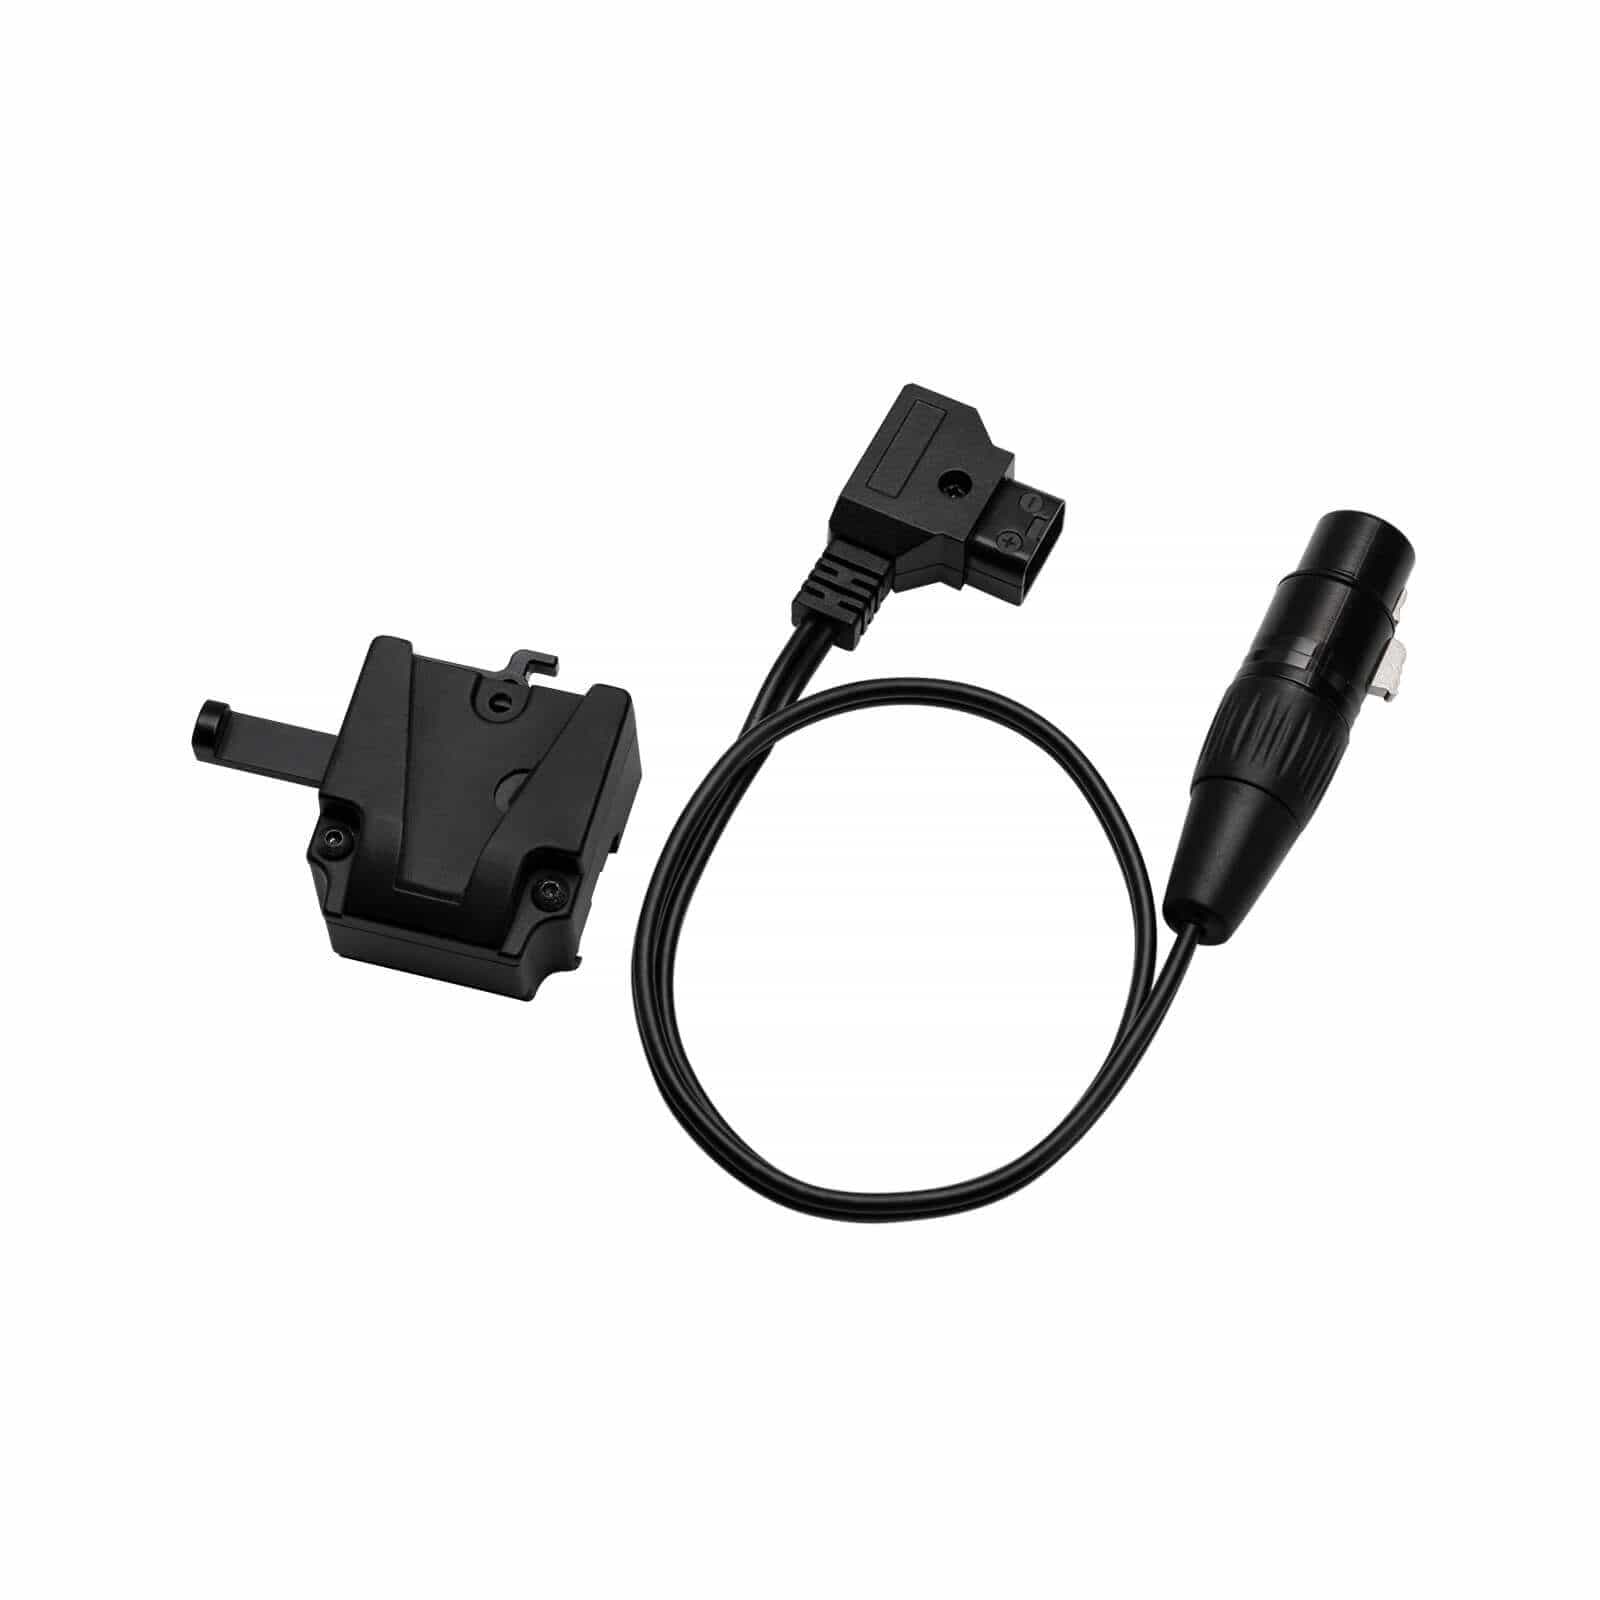 COLBOR VM3 includes a V-mount adapter and a D-Tap to XLR cable.